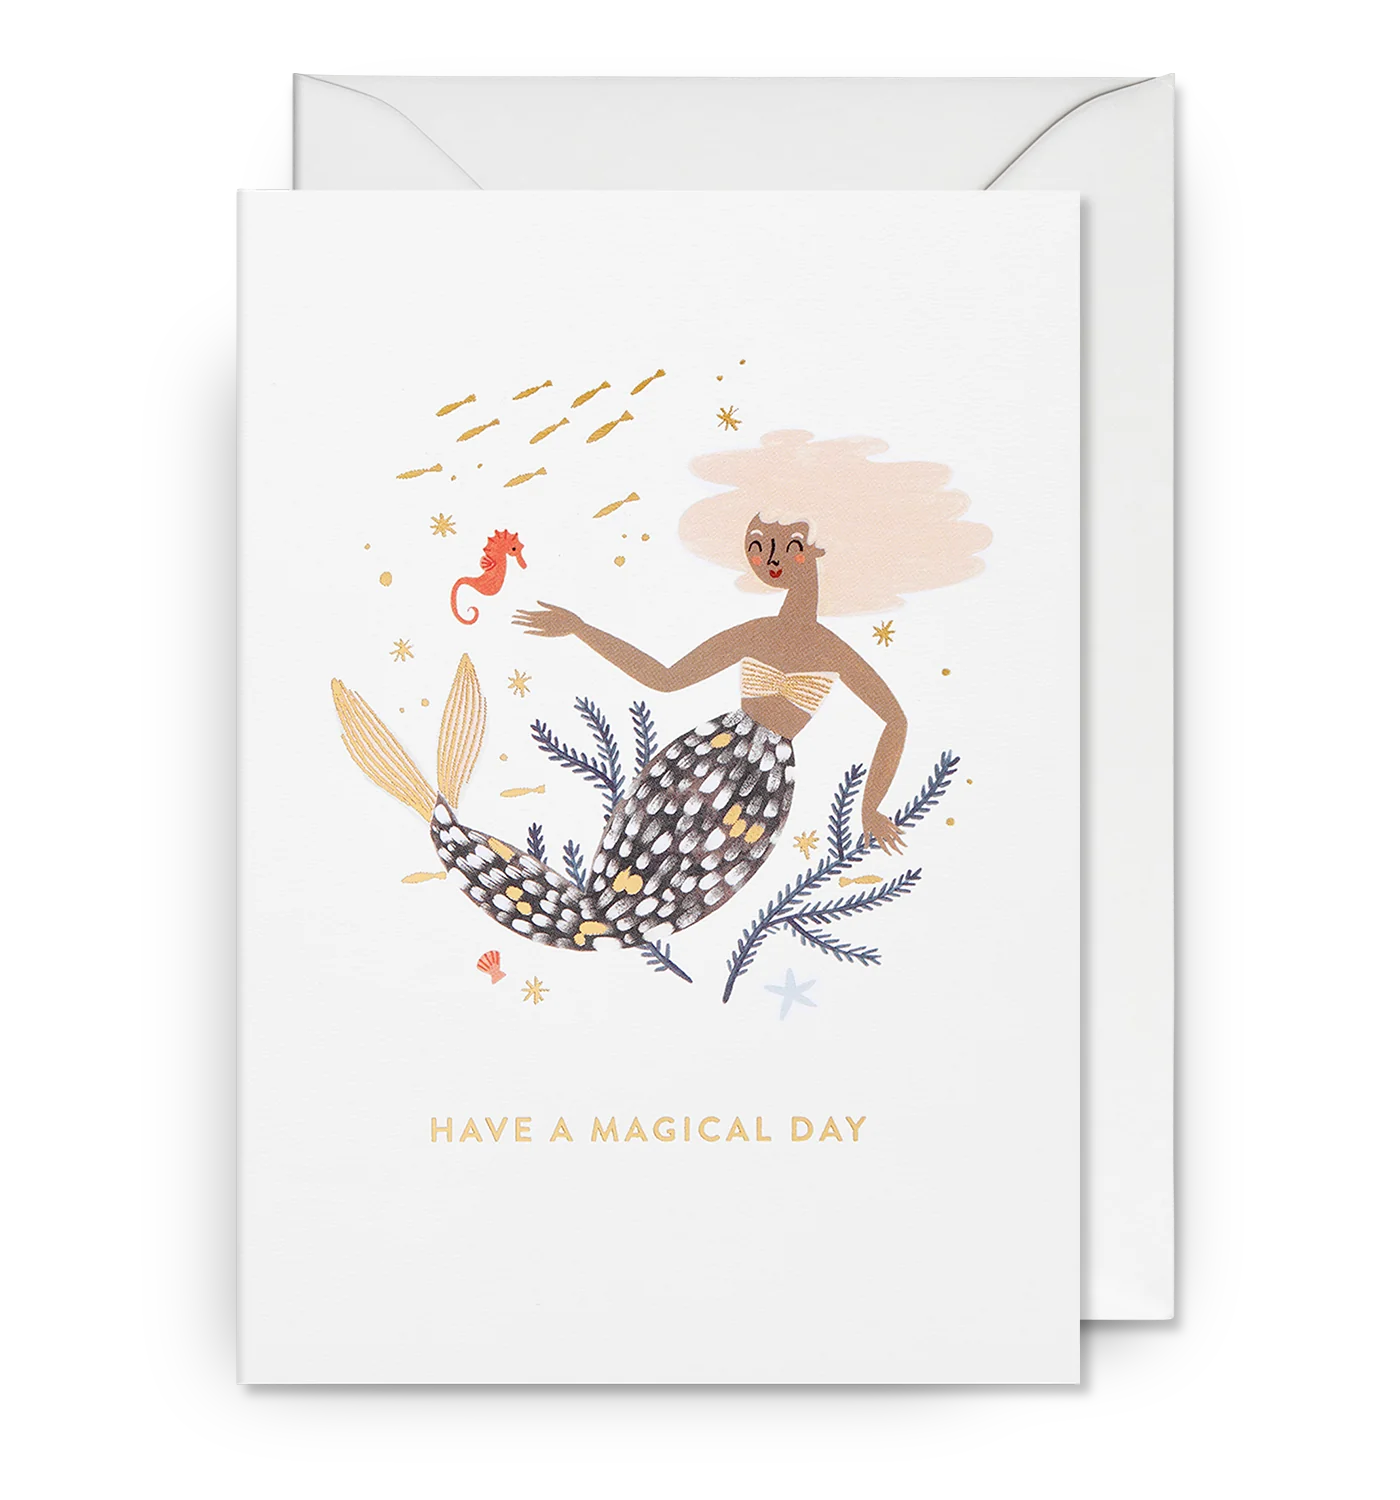 Have a Magical Day Illustrated Mermaid Card by Meghann Rader